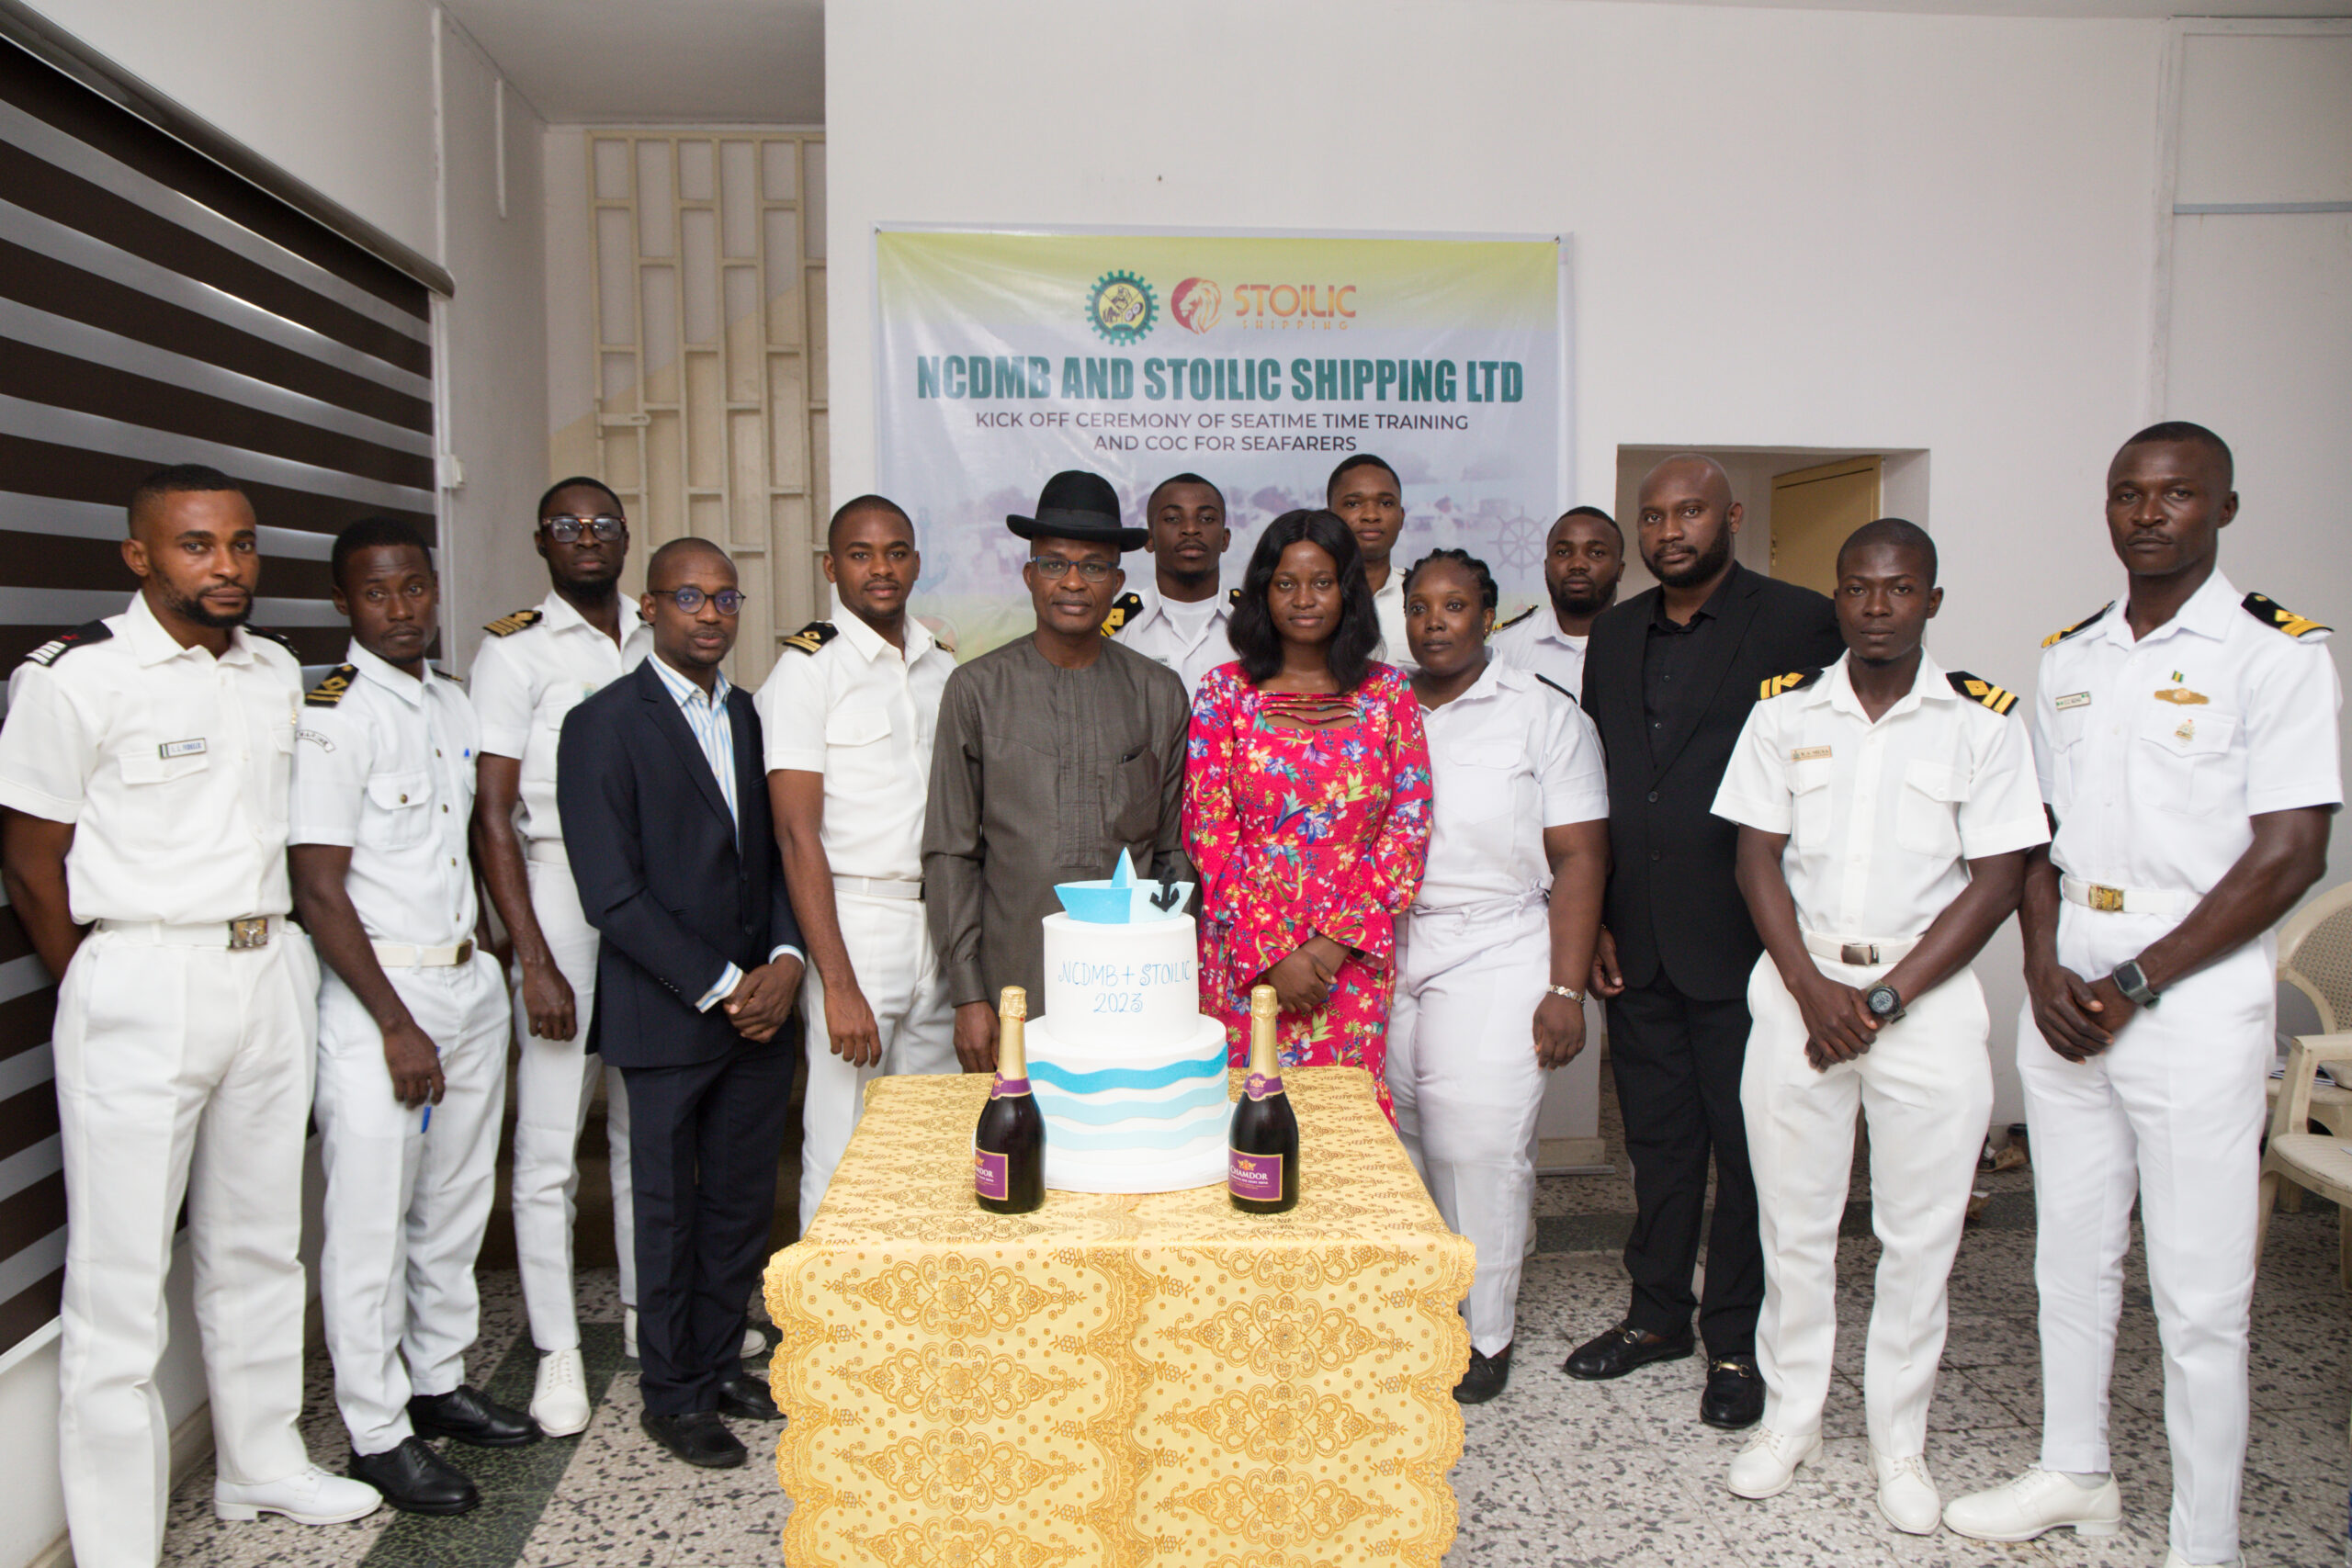 NCDMB and Stoilic Shipping Limited staff alongside Nigerian Navy cadets.